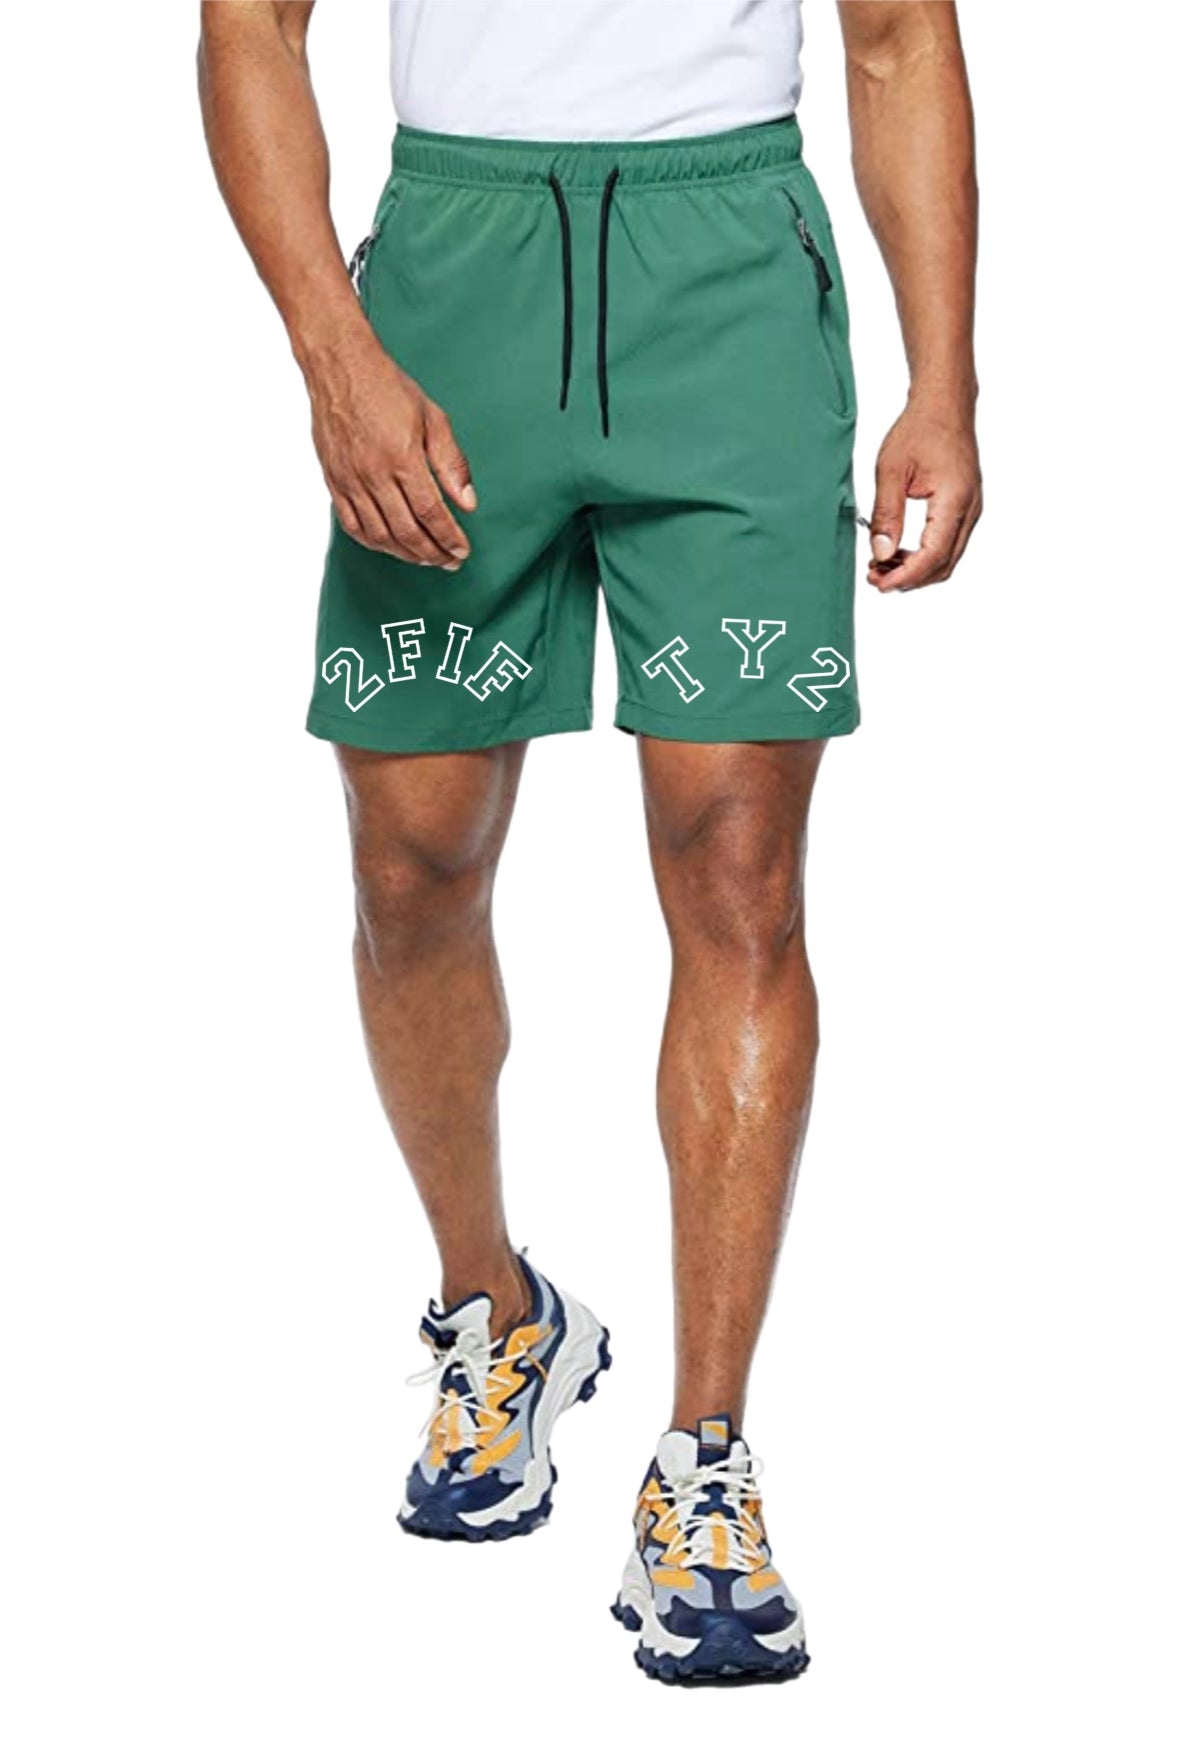 Men’s dry fit cargo shorts